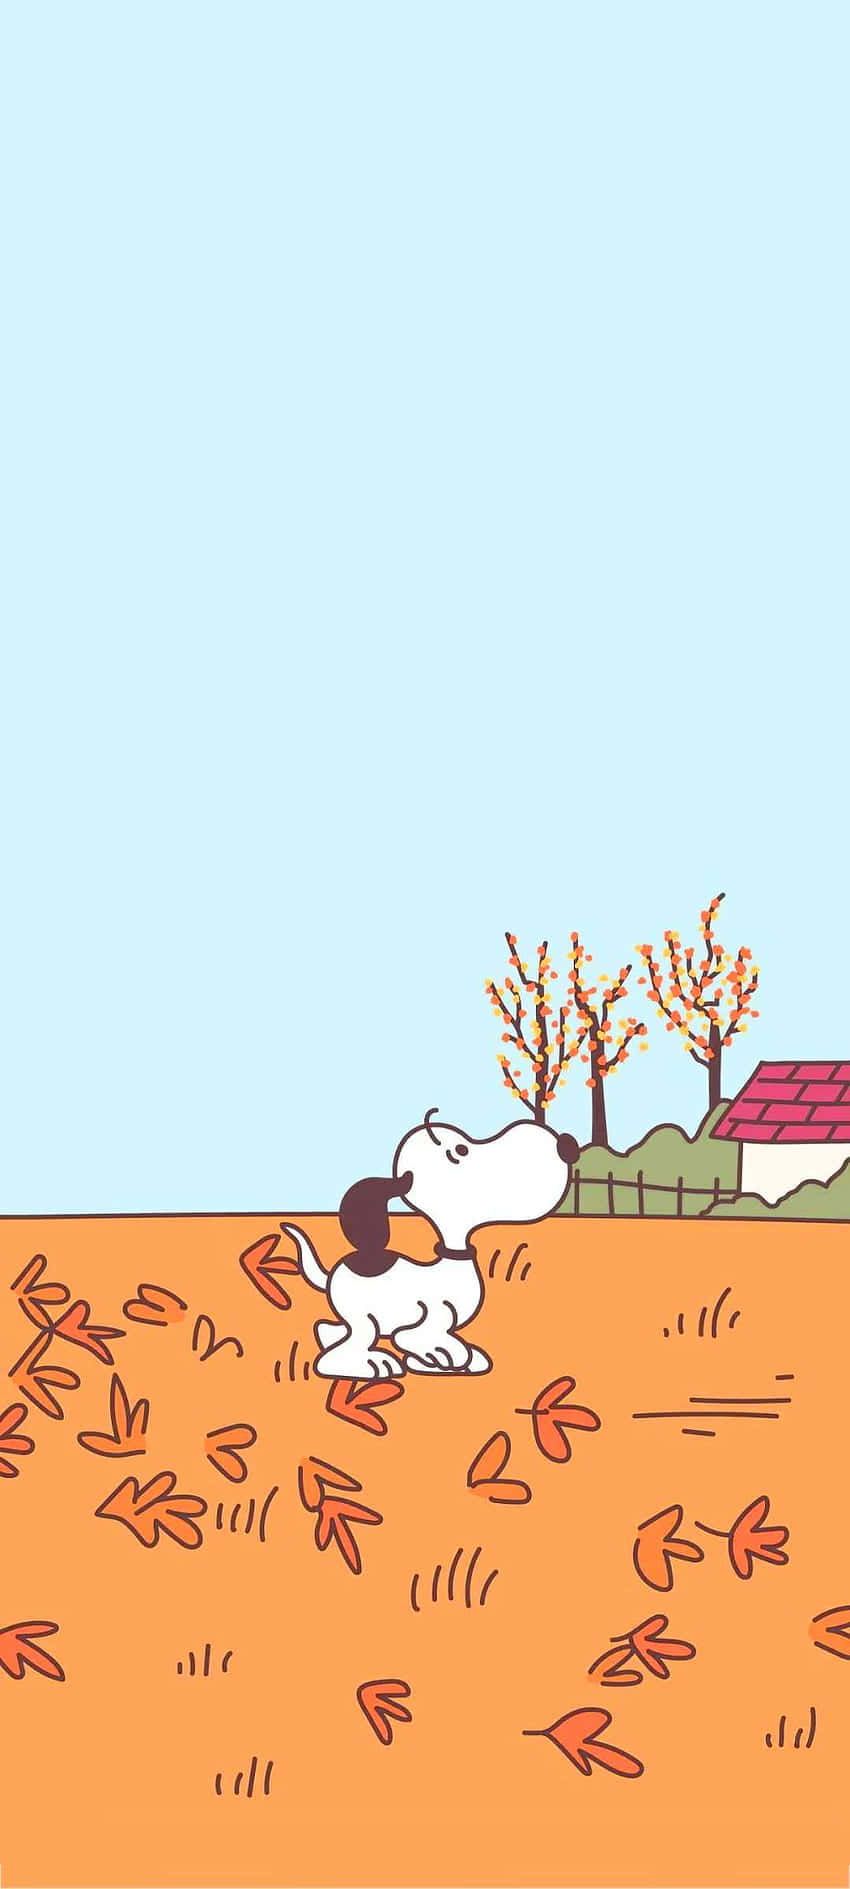 Free Snoopy Autumn Wallpaper Downloads, Snoopy Autumn Wallpaper for FREE